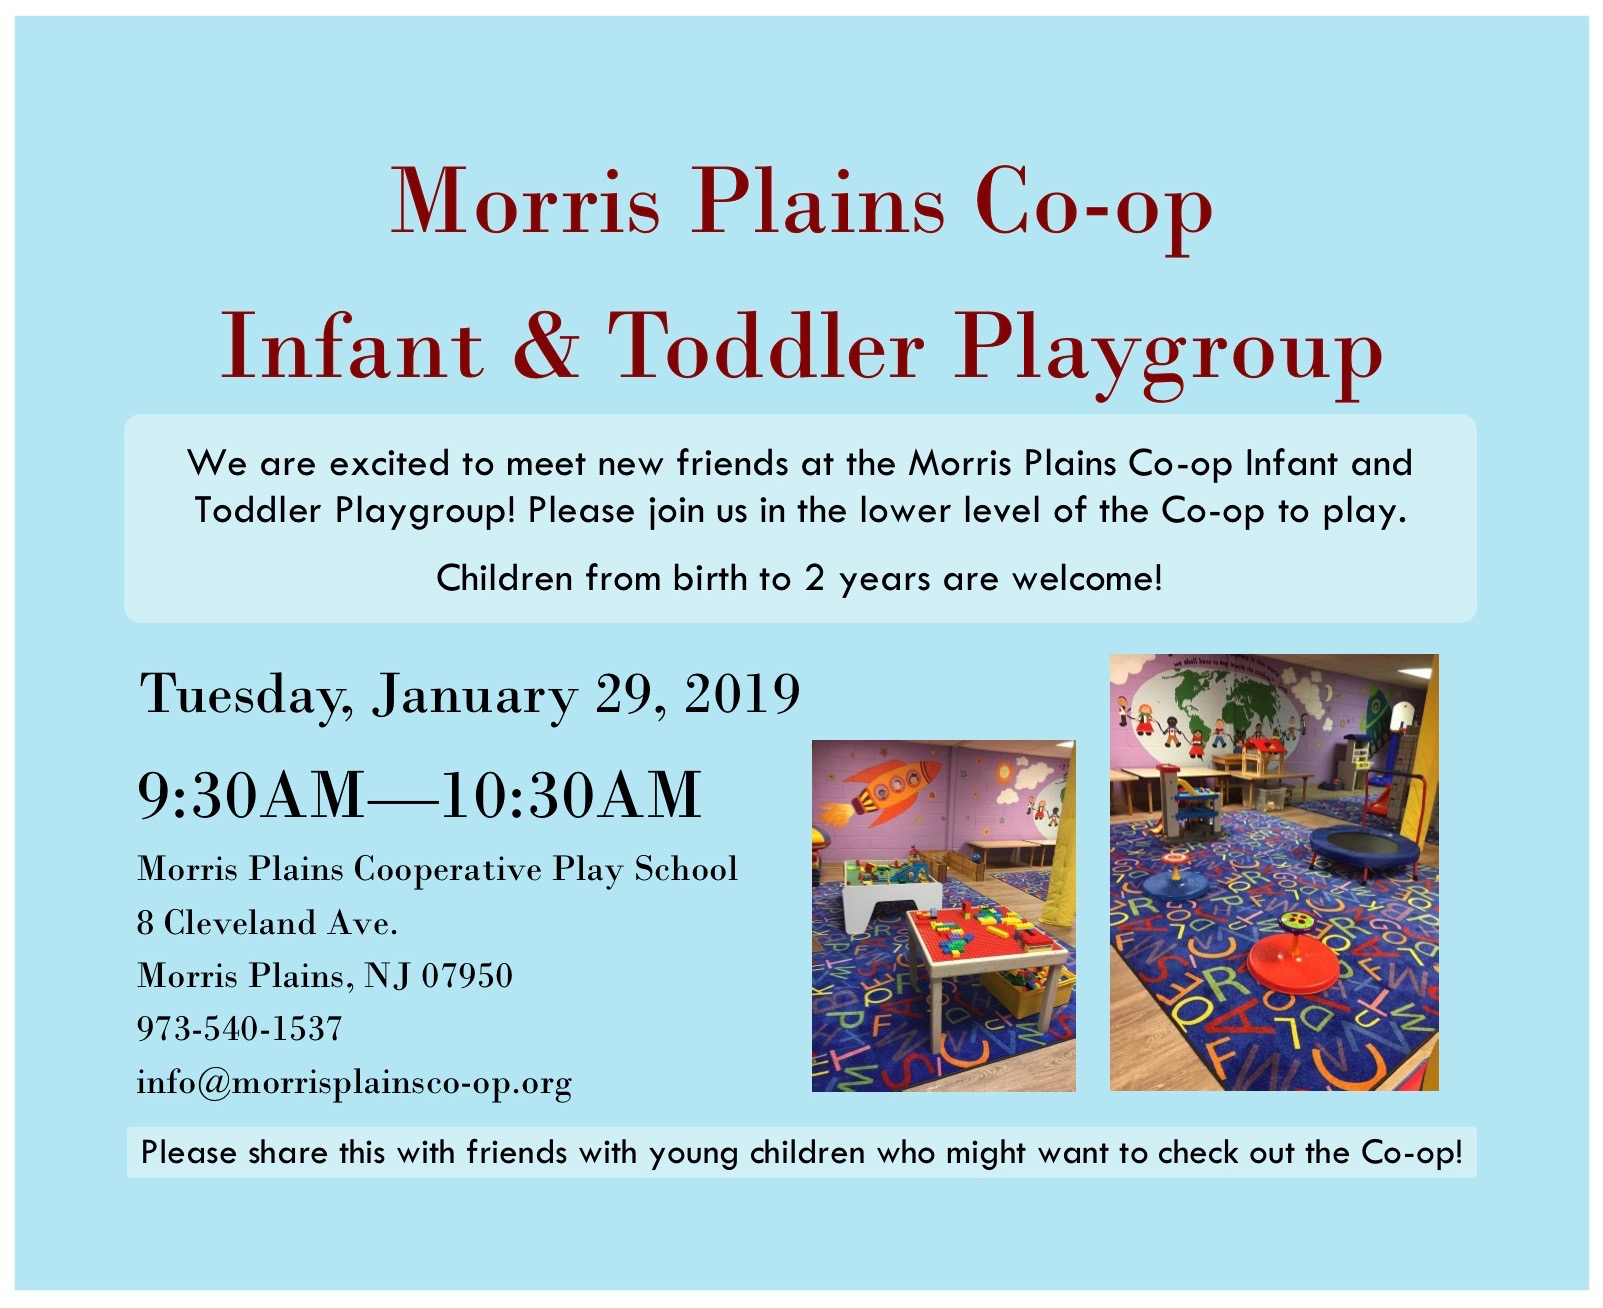 Infant & Toddler Playgroup